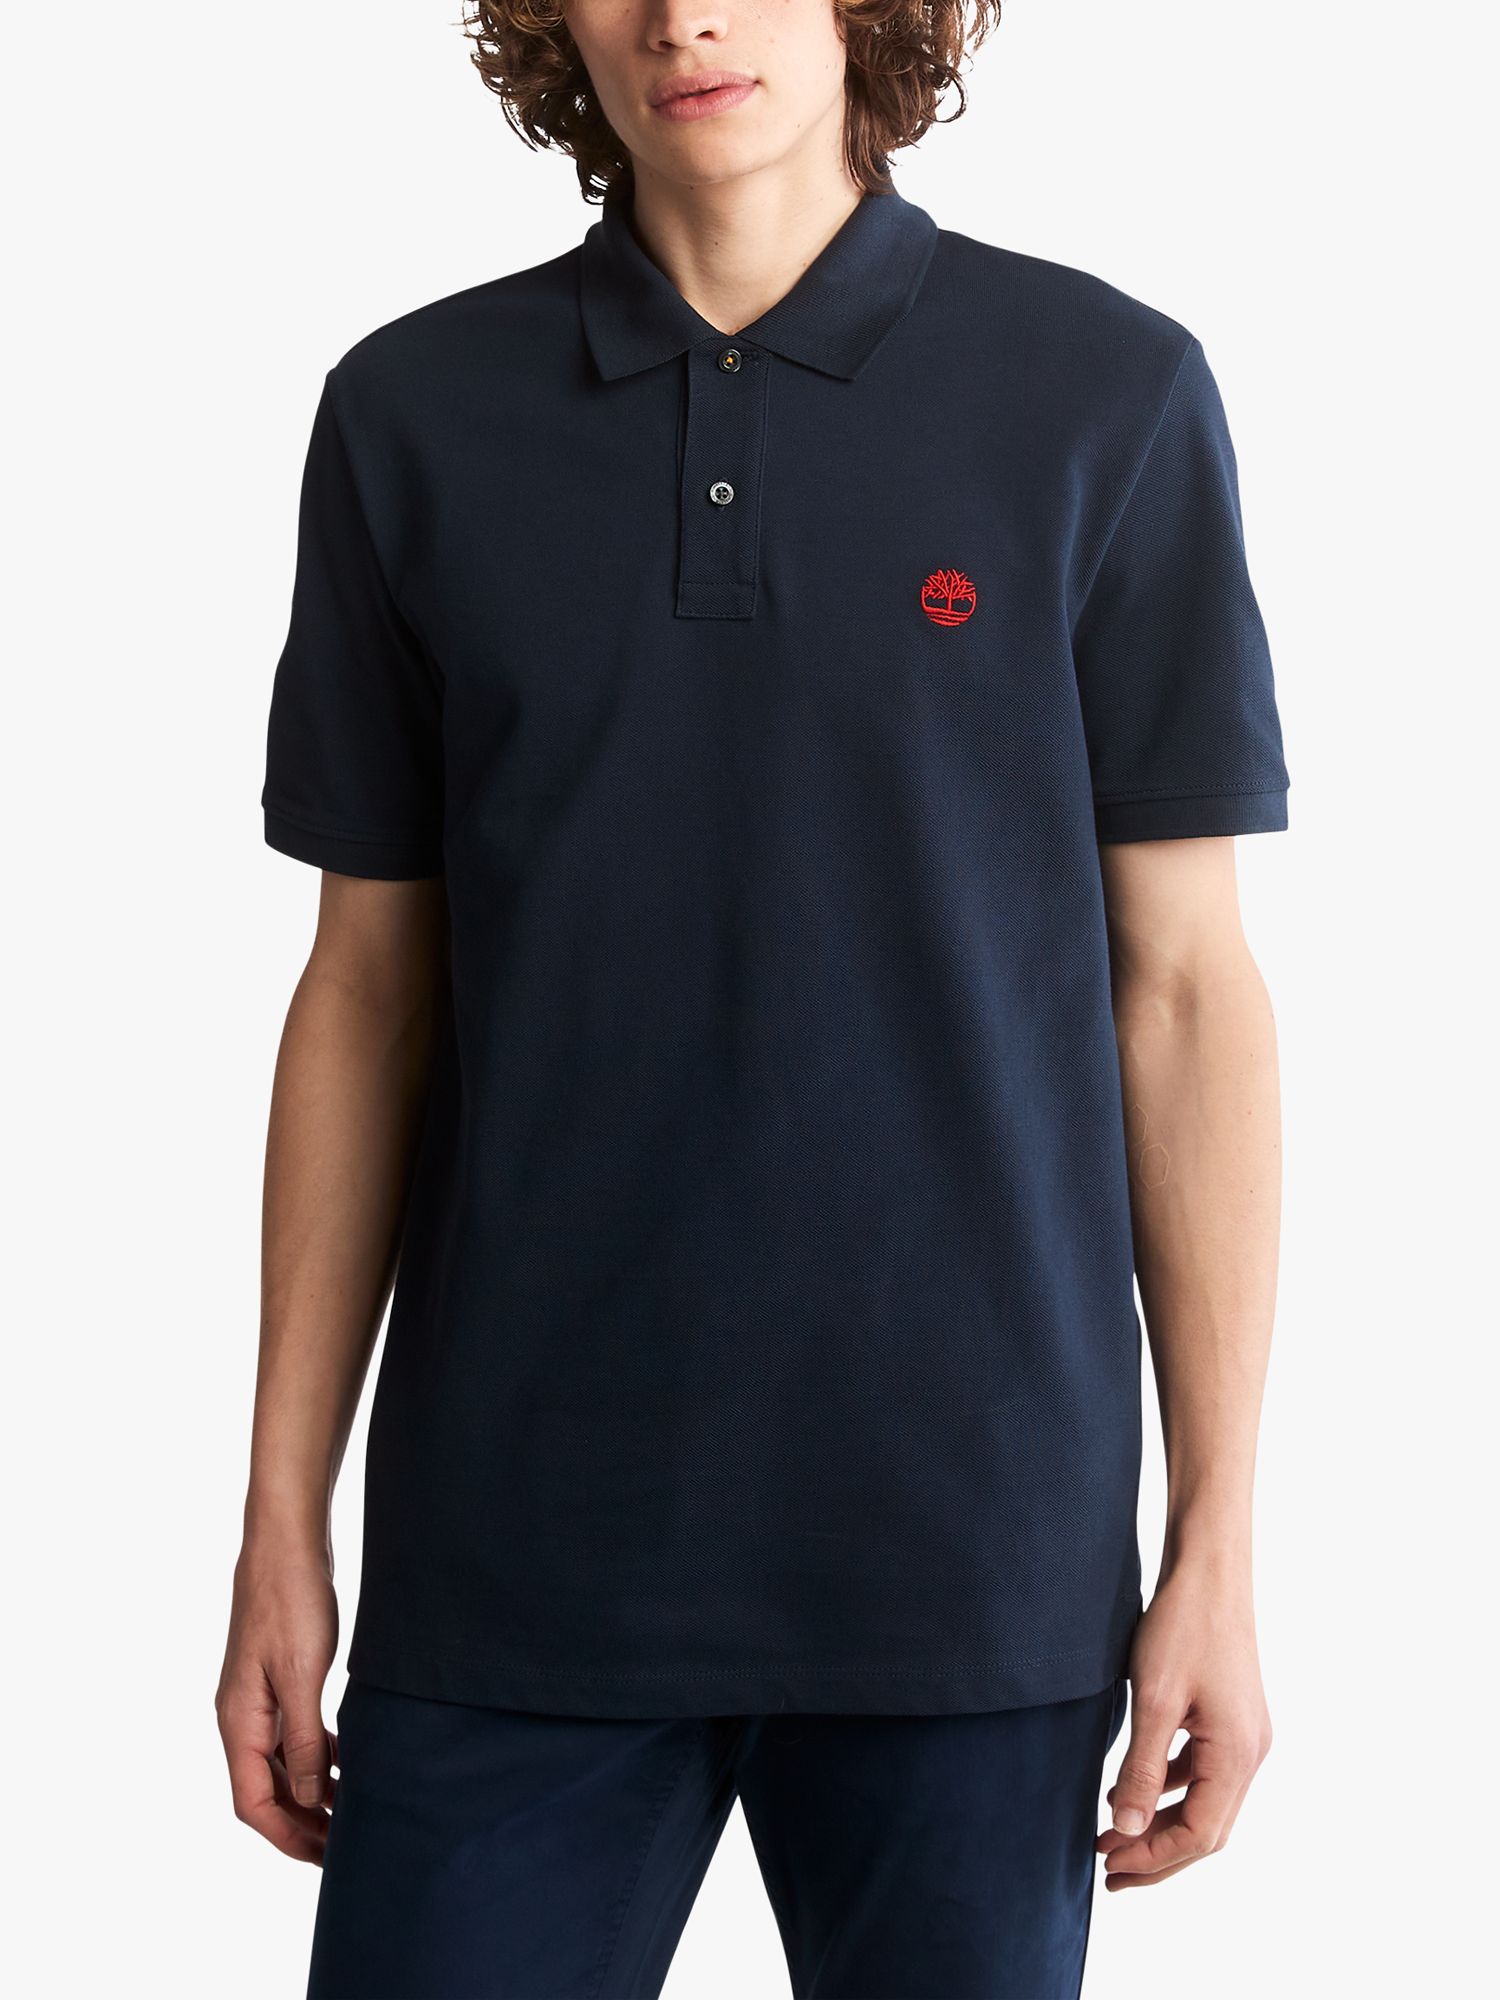 Timberland Millers Rivers Short Sleeve Polo Top, Navy, S